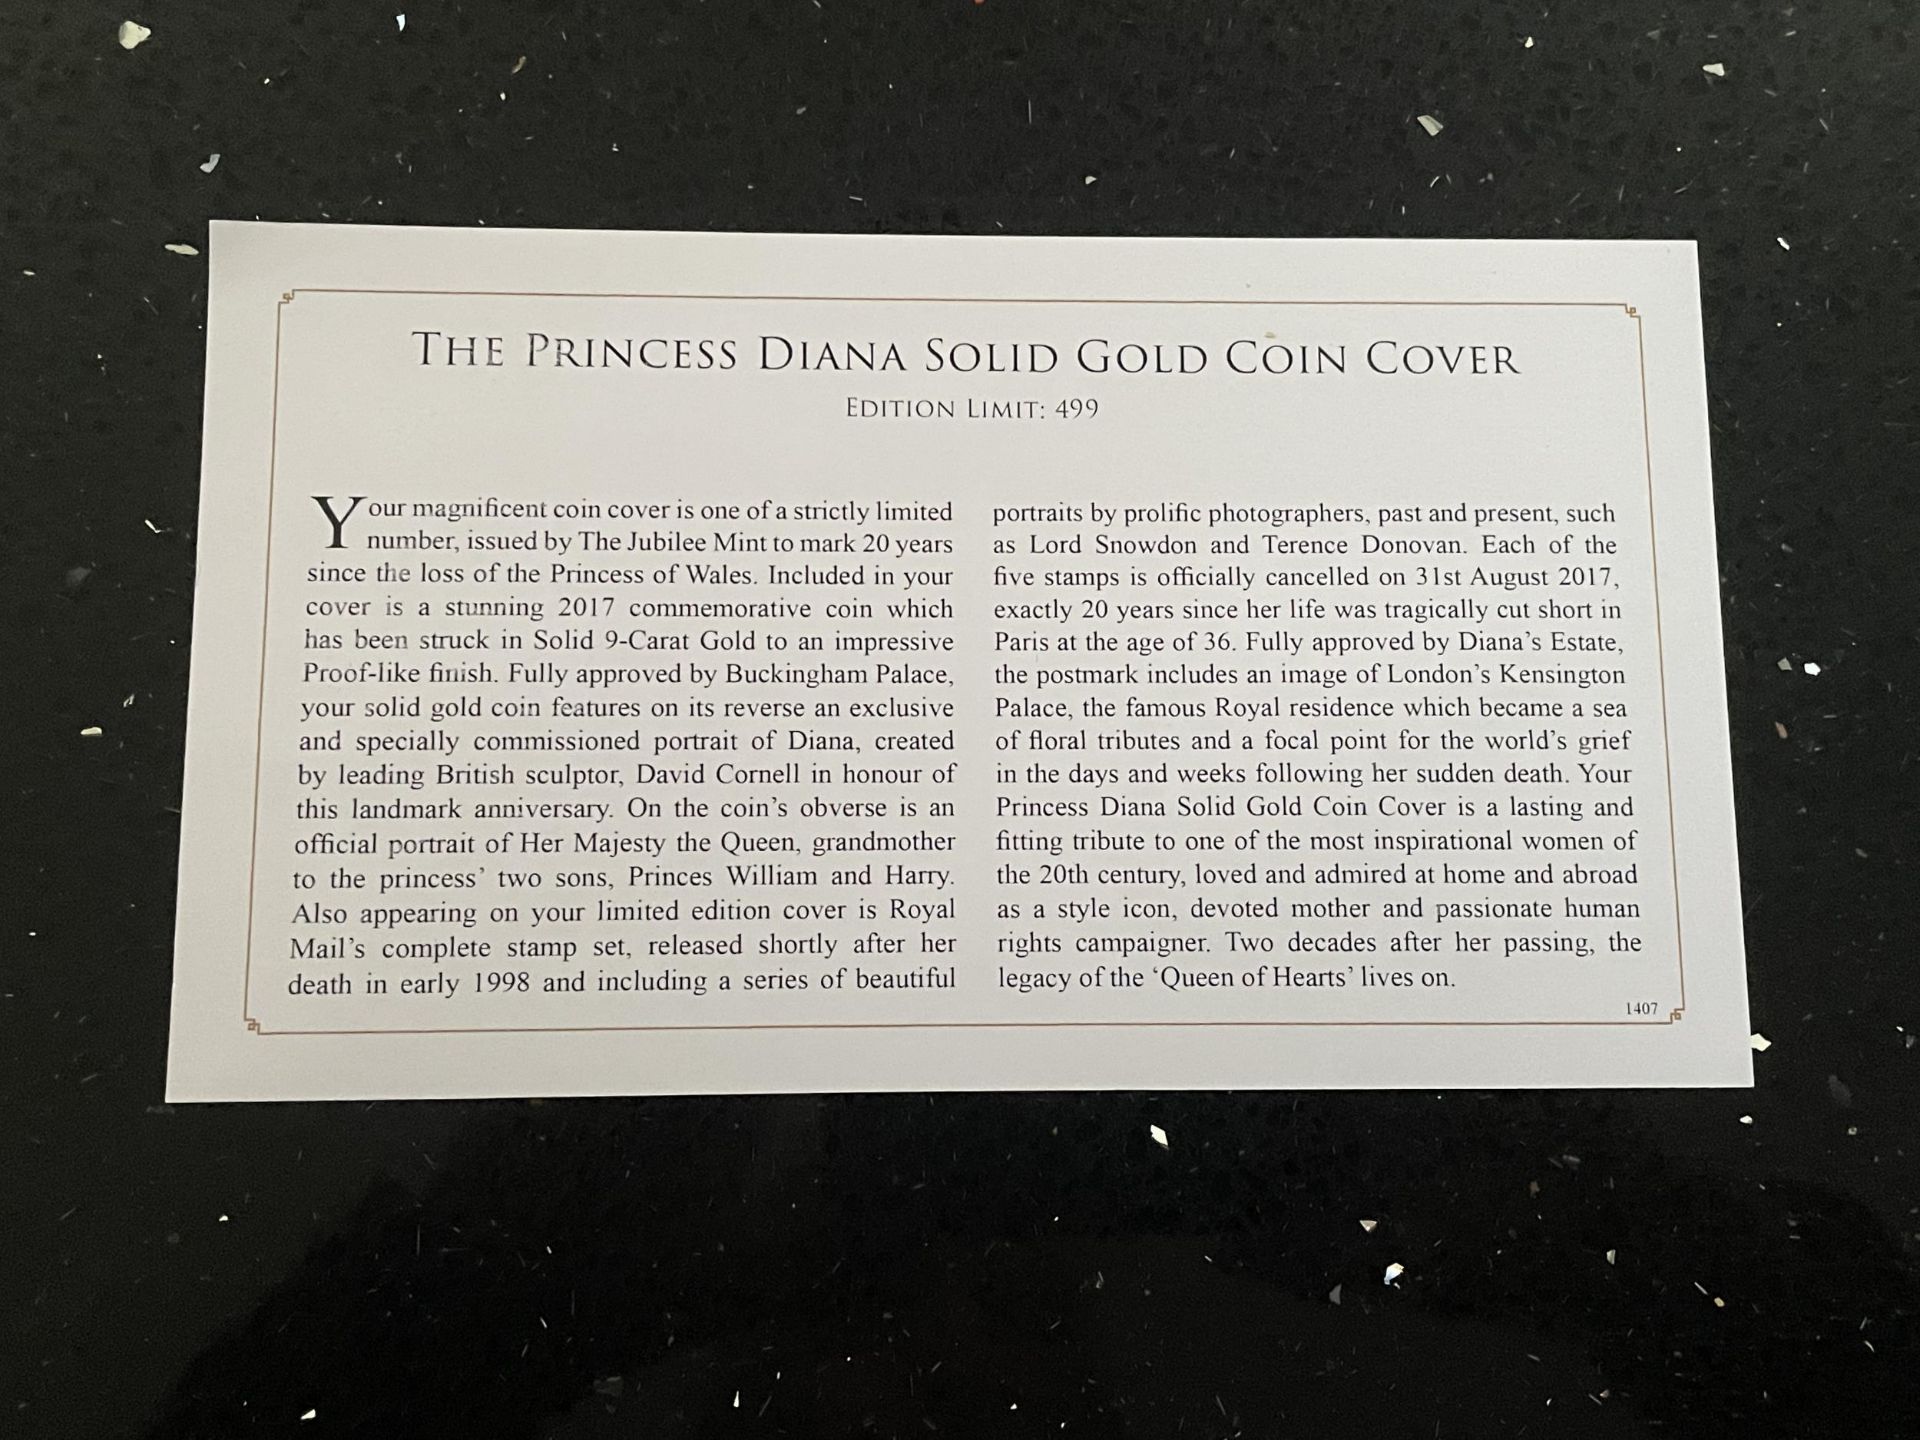 A PRINCESS DIANA 9 CARAT GOLD COMMEMORATIVE COIN COVER - LIMITED EDITION OF 499 - Image 4 of 4